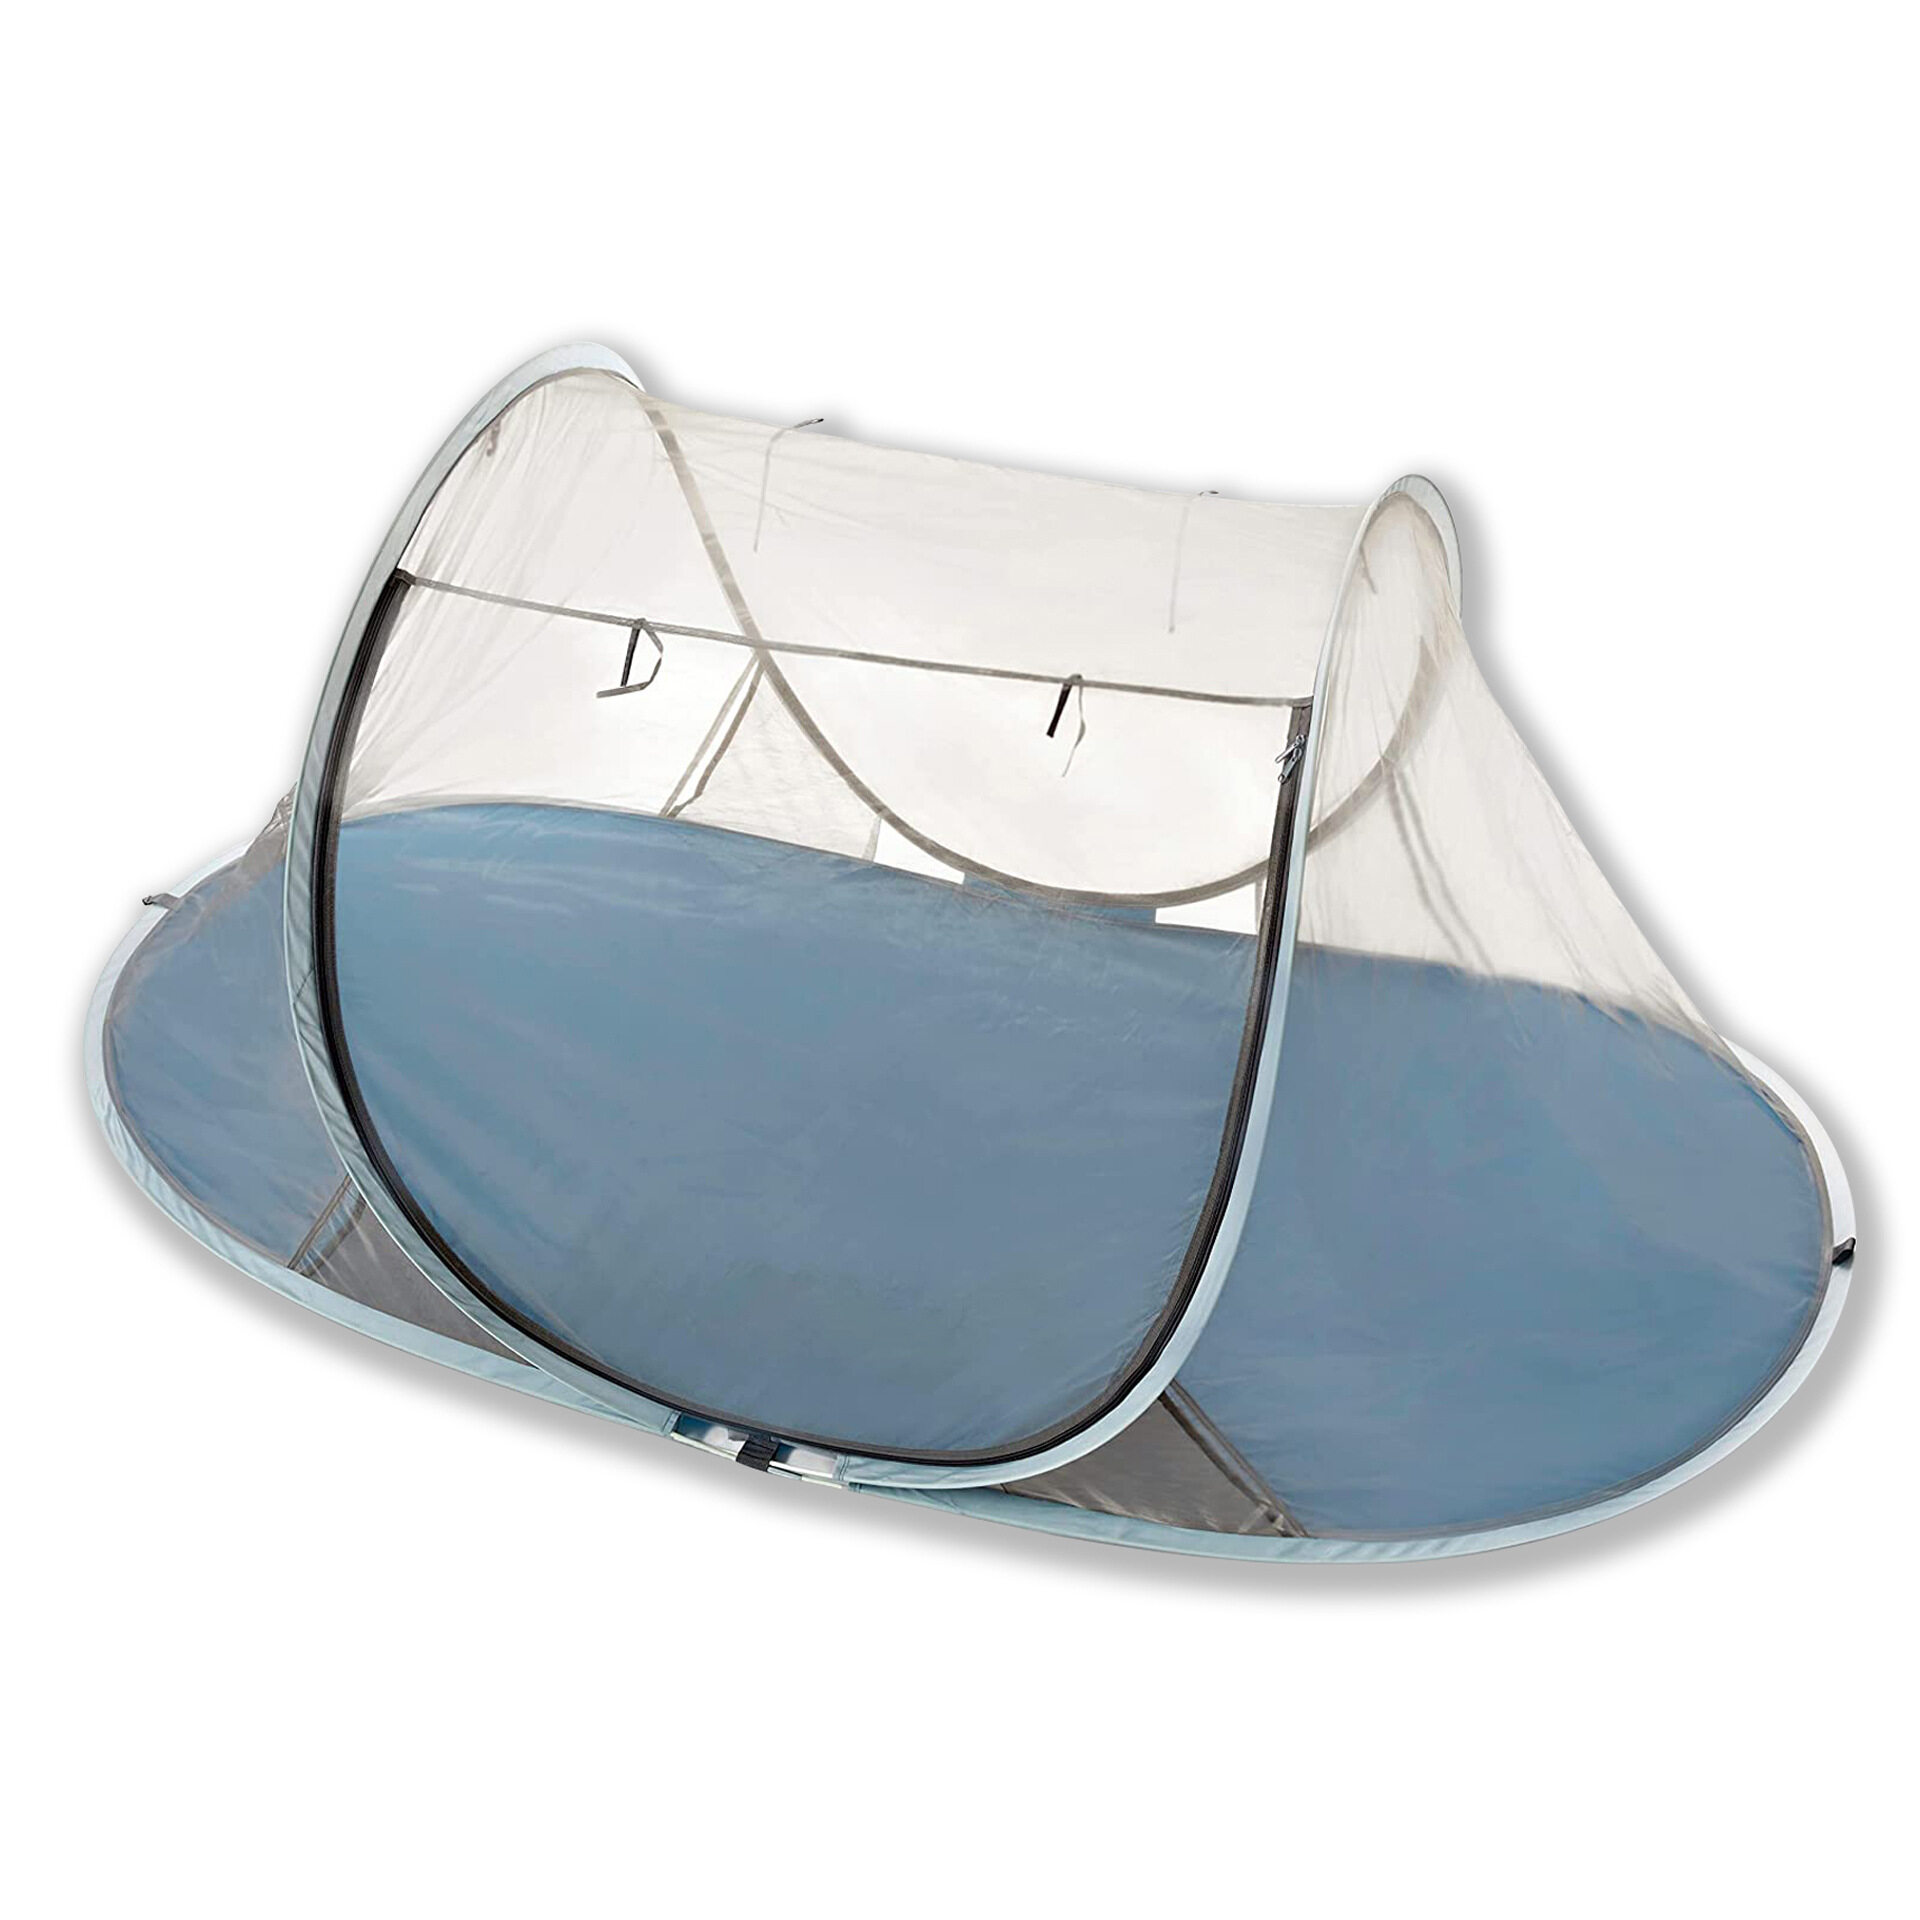 camping tent mosquito net, camp mosquito net, camping canopy with mosquito net, camping mosquito nets, camping tent with mosquito net